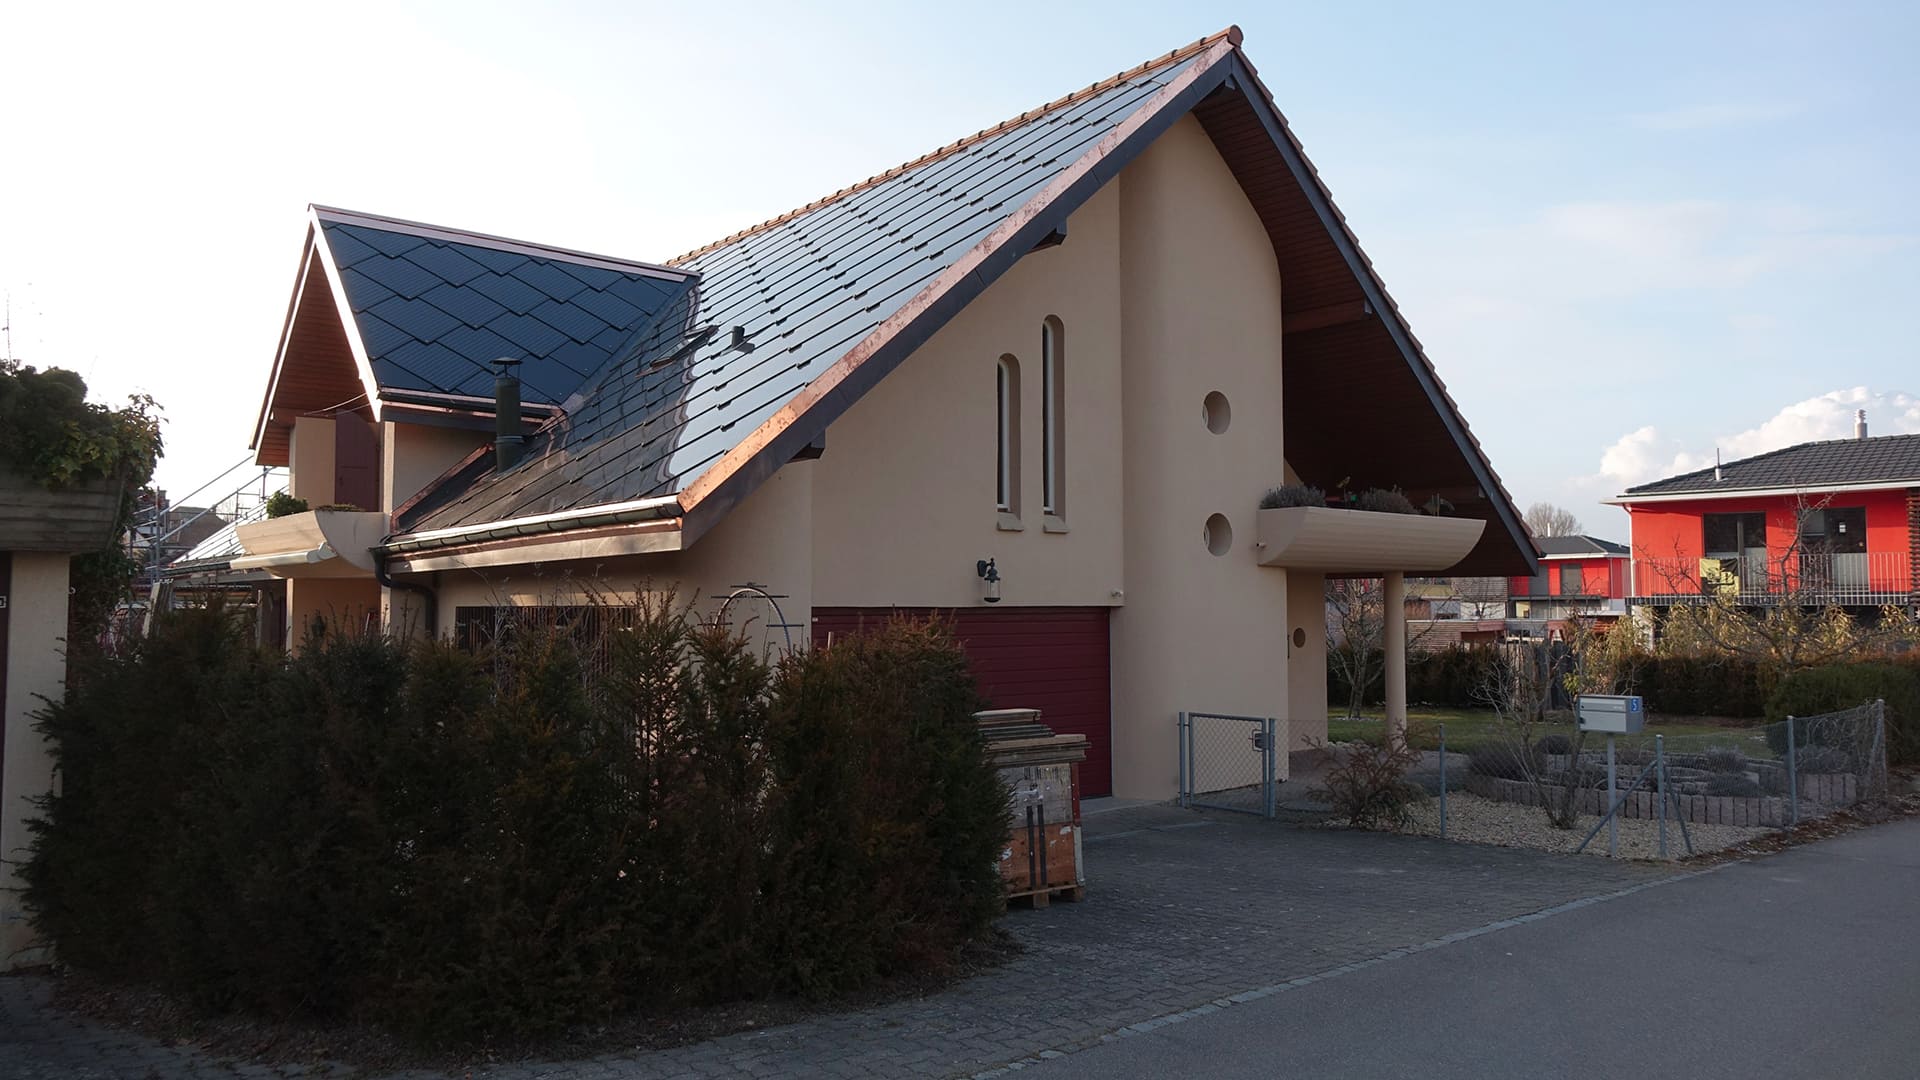 SunStyle Photovoltaic Solar Roof on residential property